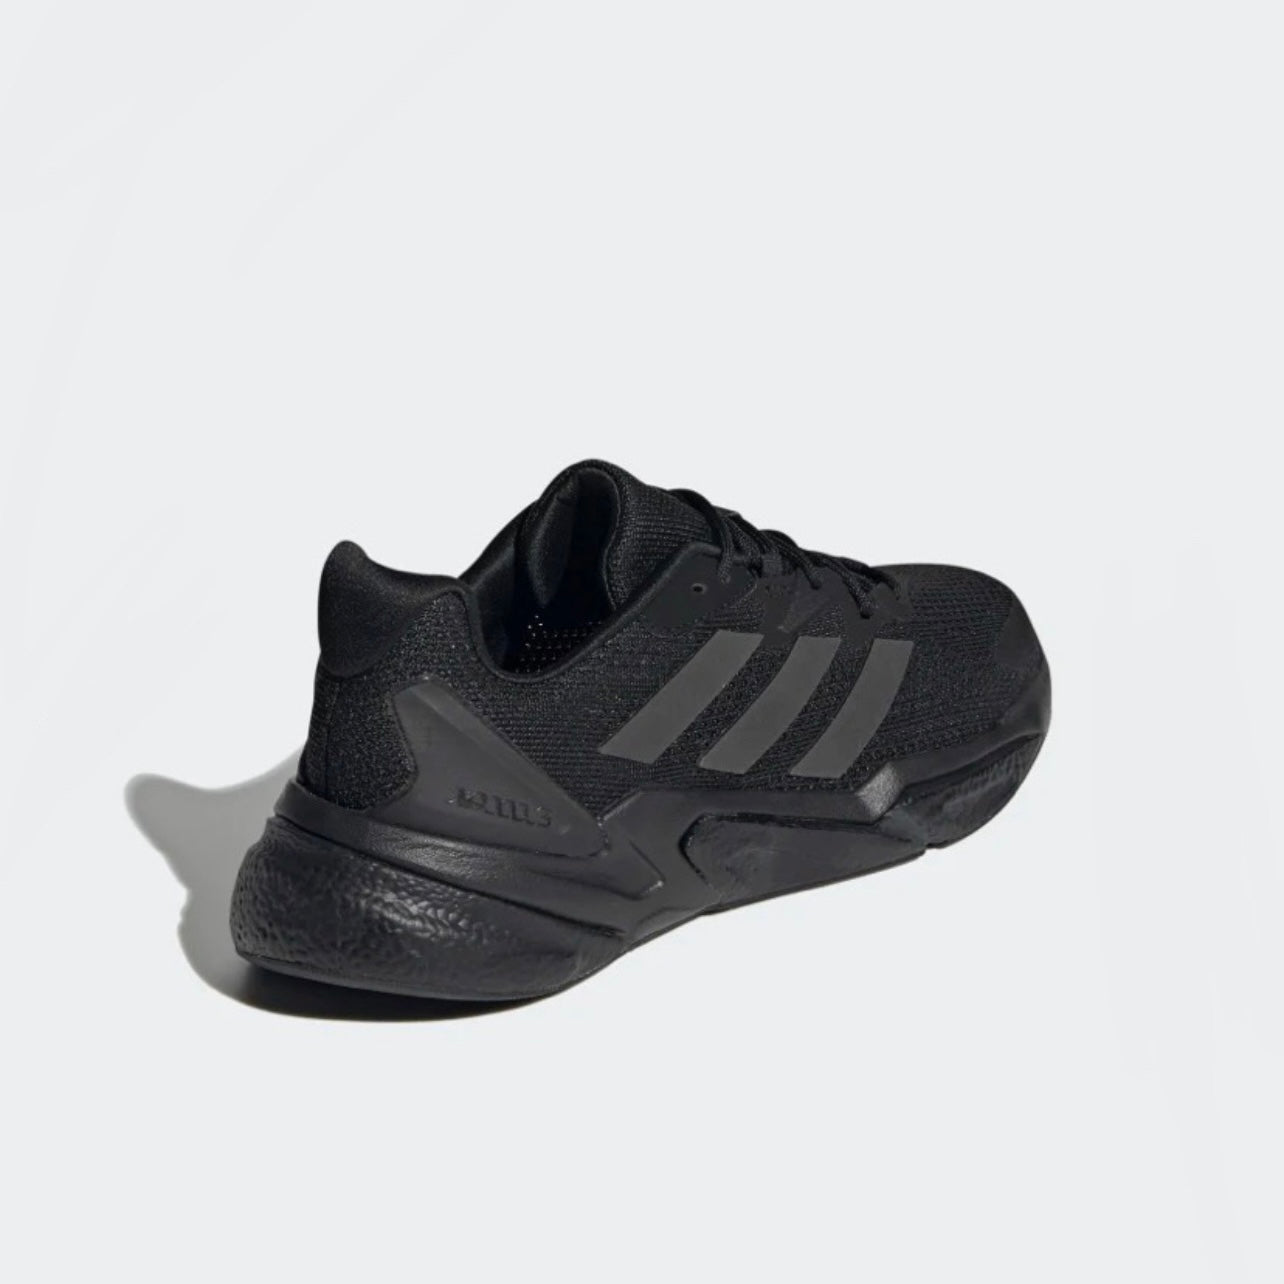 Adidas sneakers for men in black and black